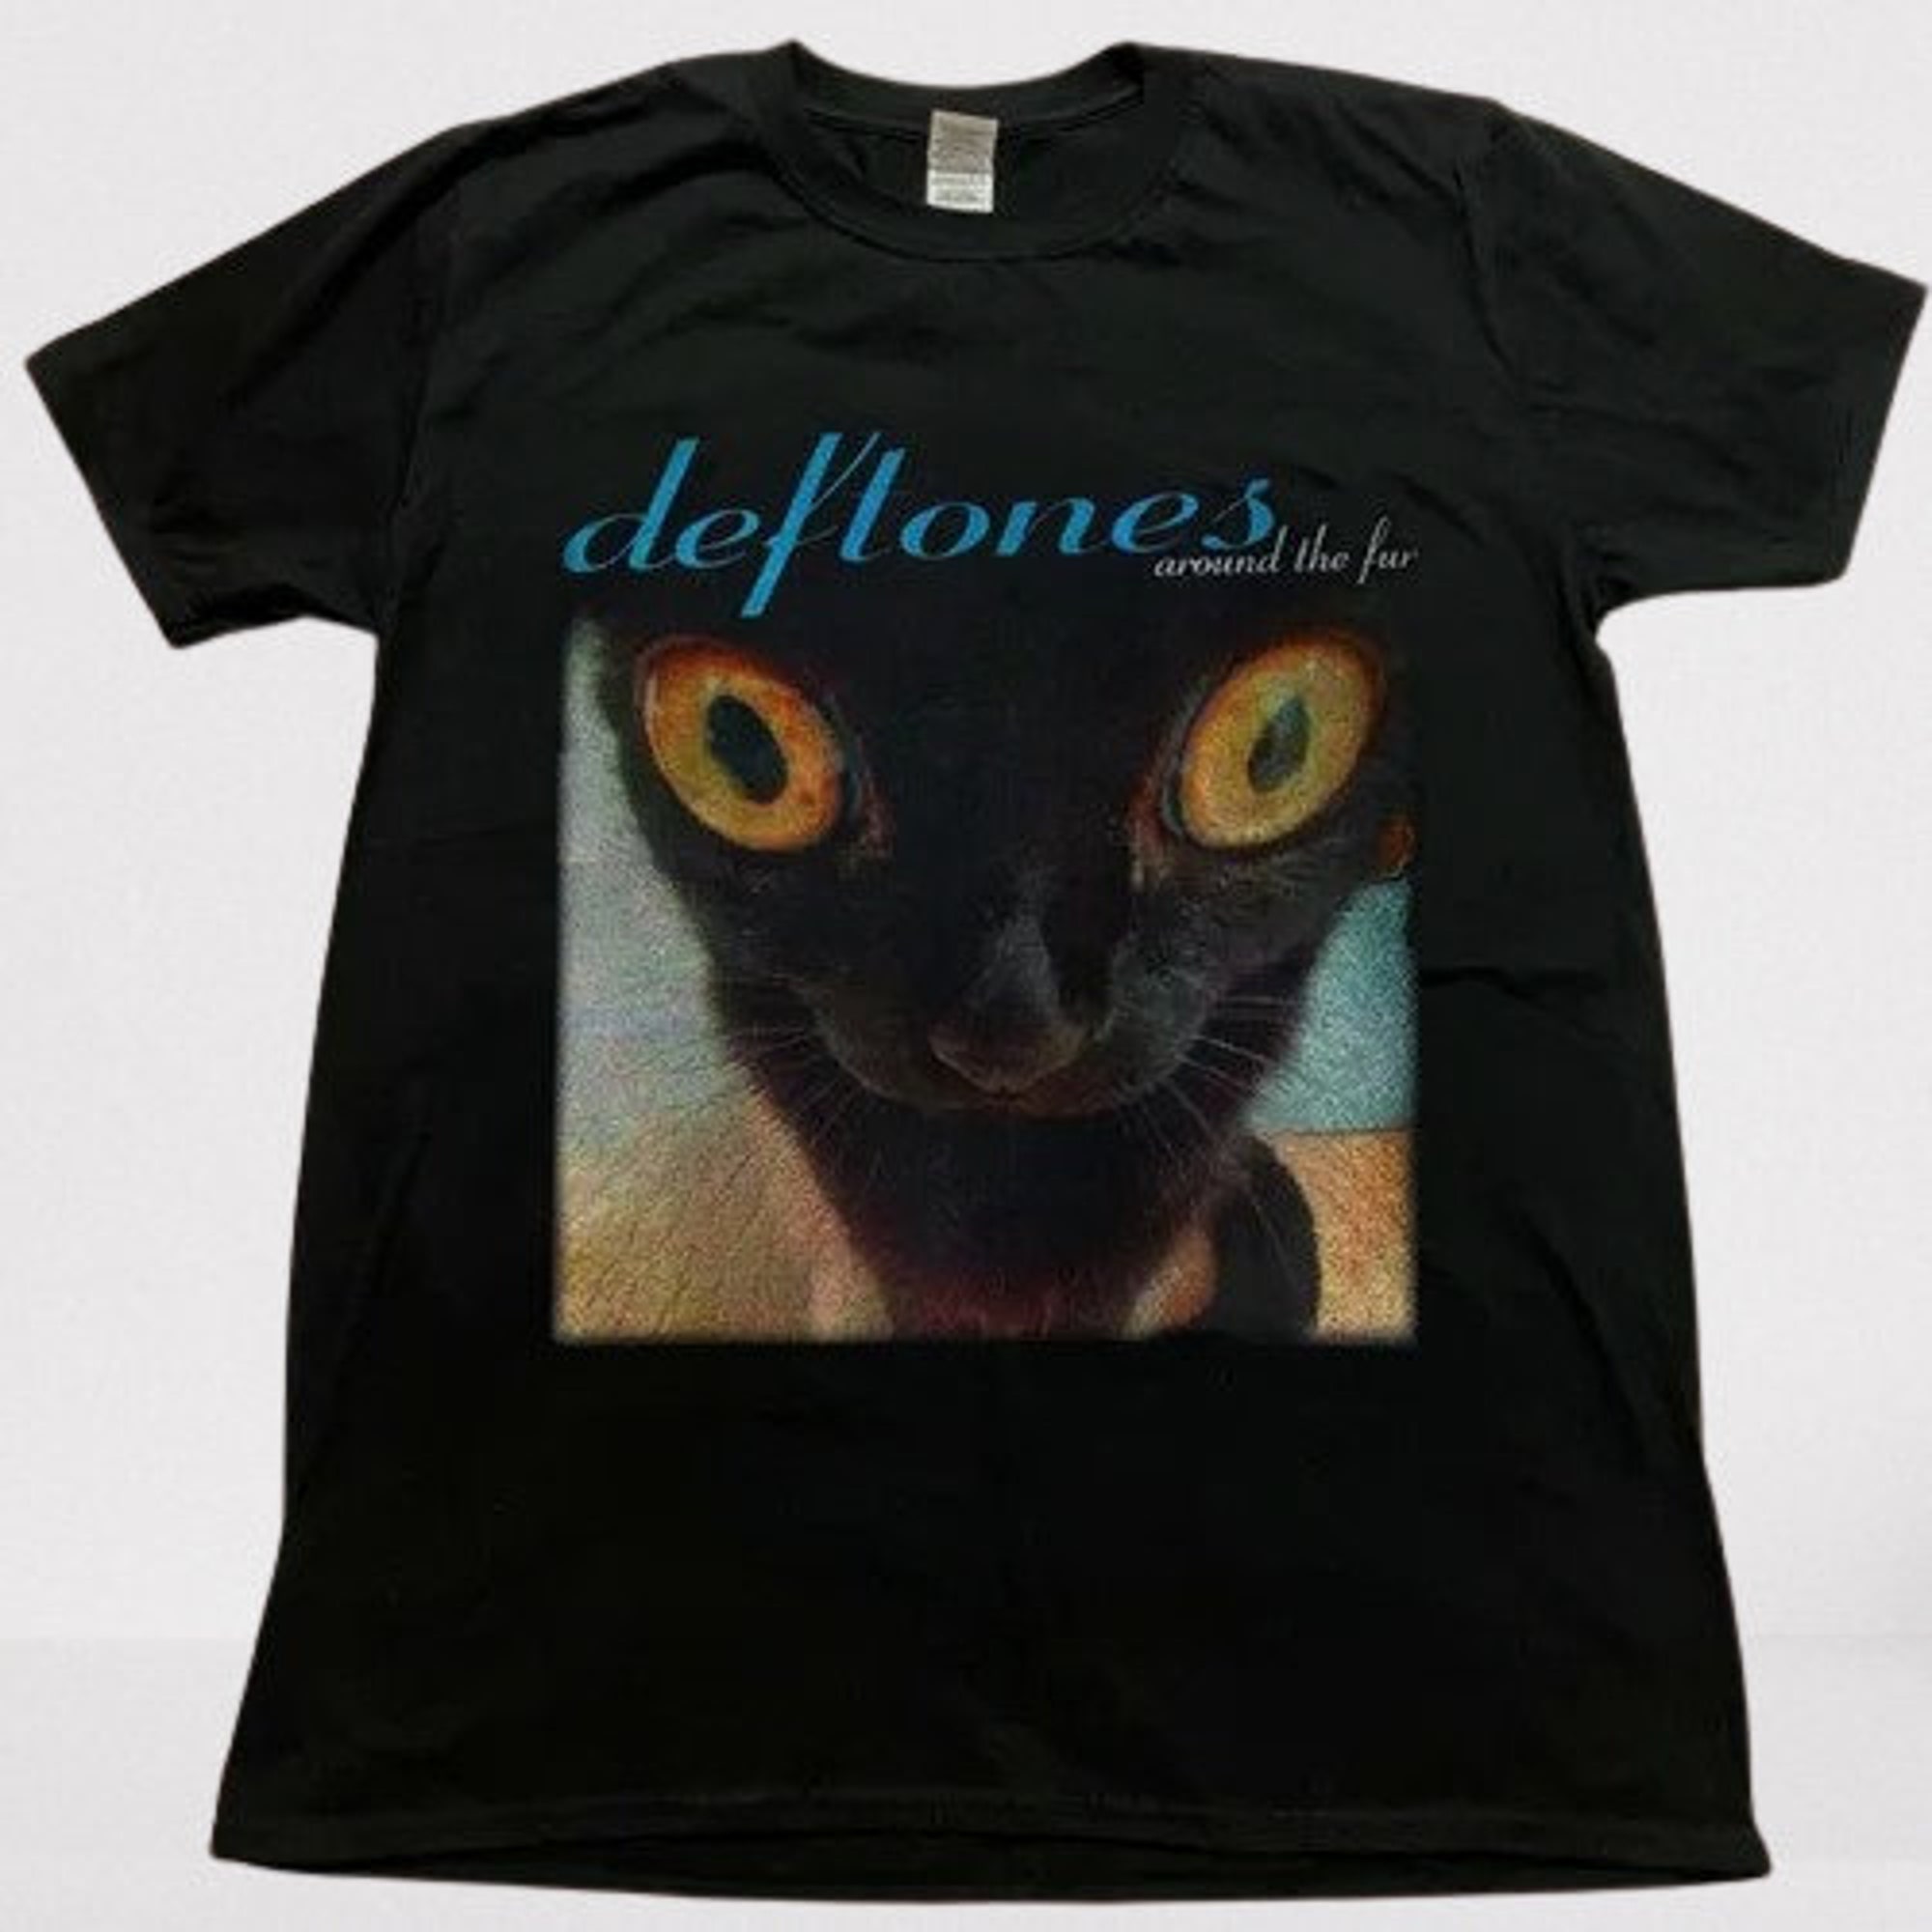 Discover vintage style t-shirt Deftone around the fur cat